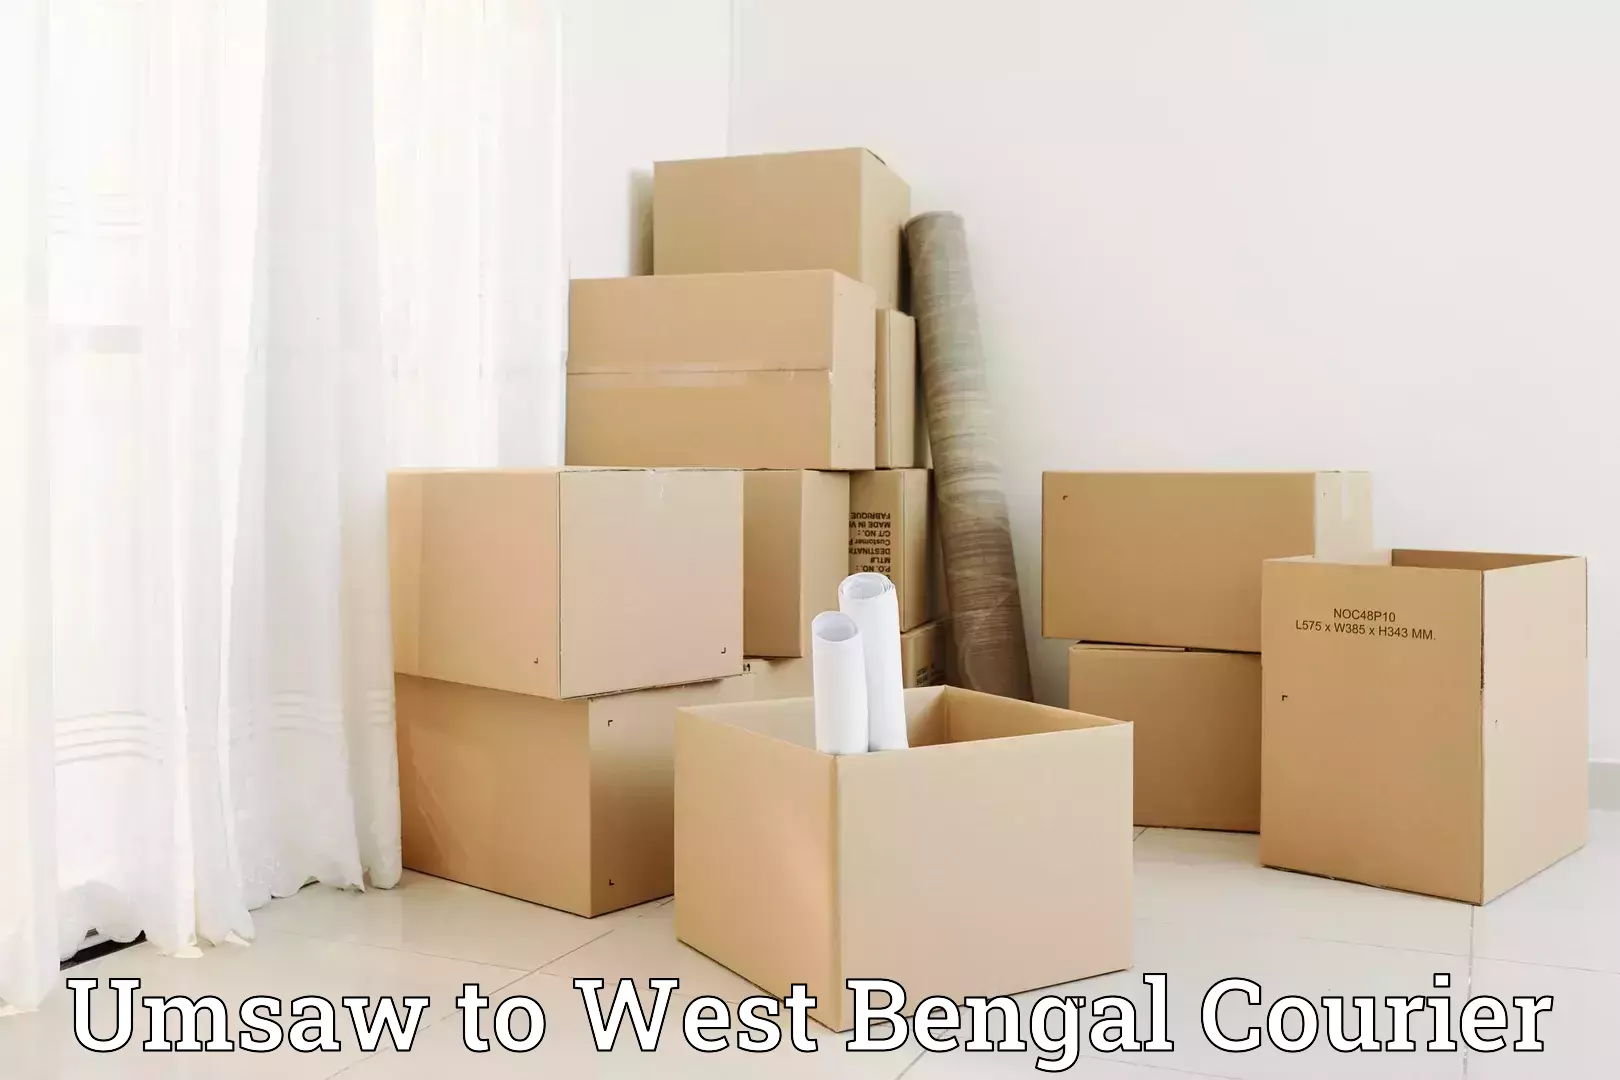 Efficient packing and moving Umsaw to West Bengal